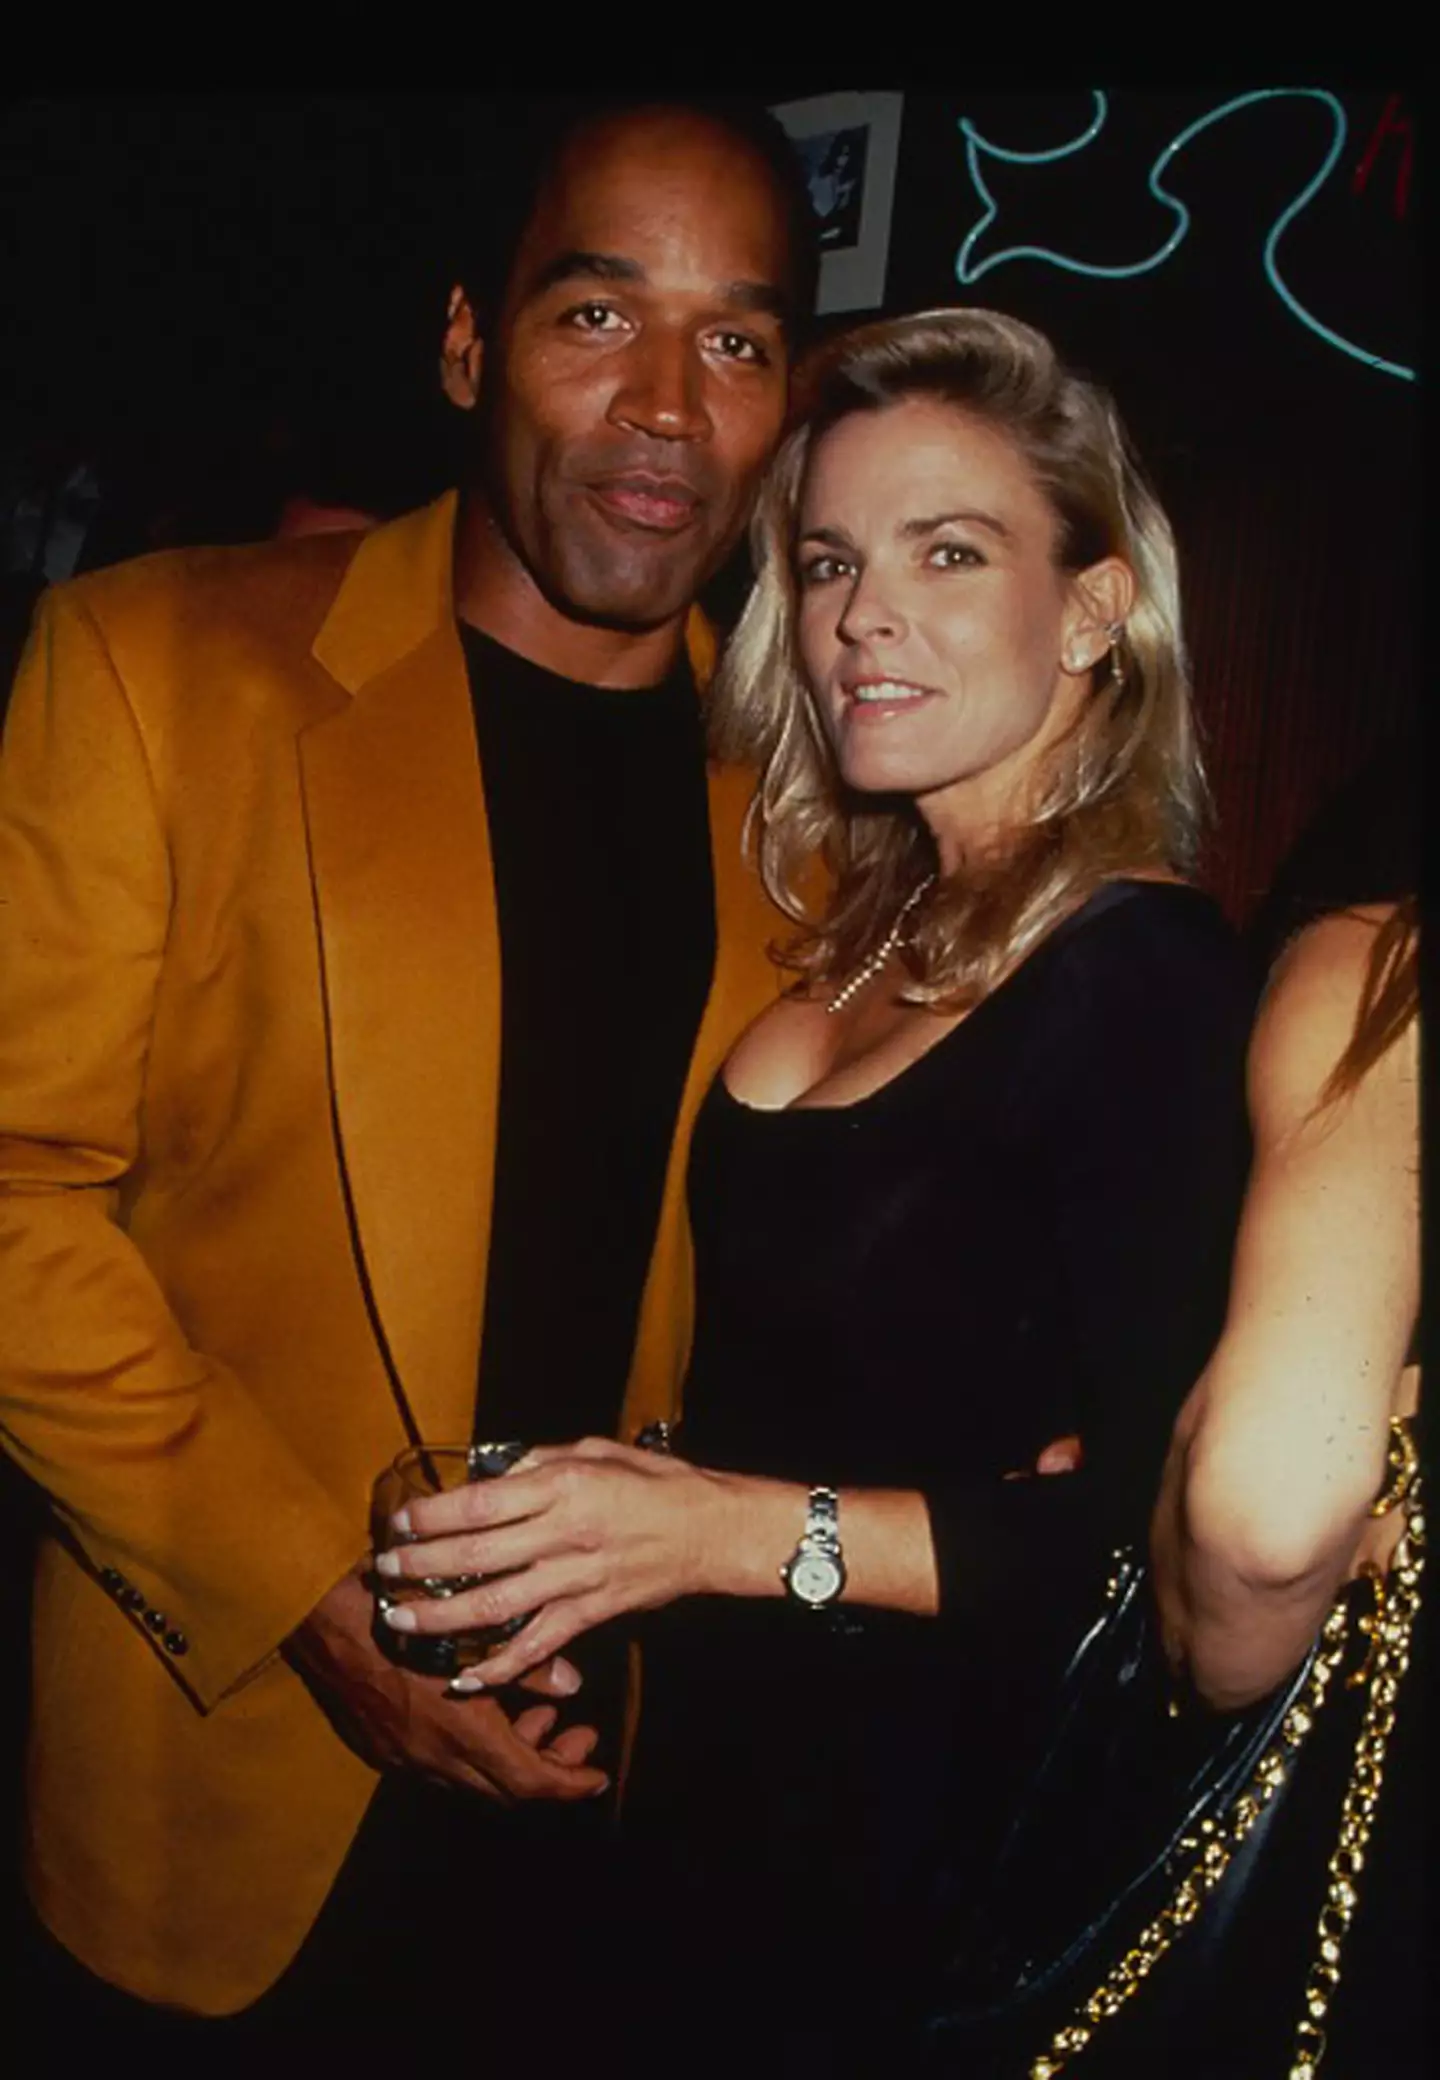 OJ was found not guilty for the murder of his wife.